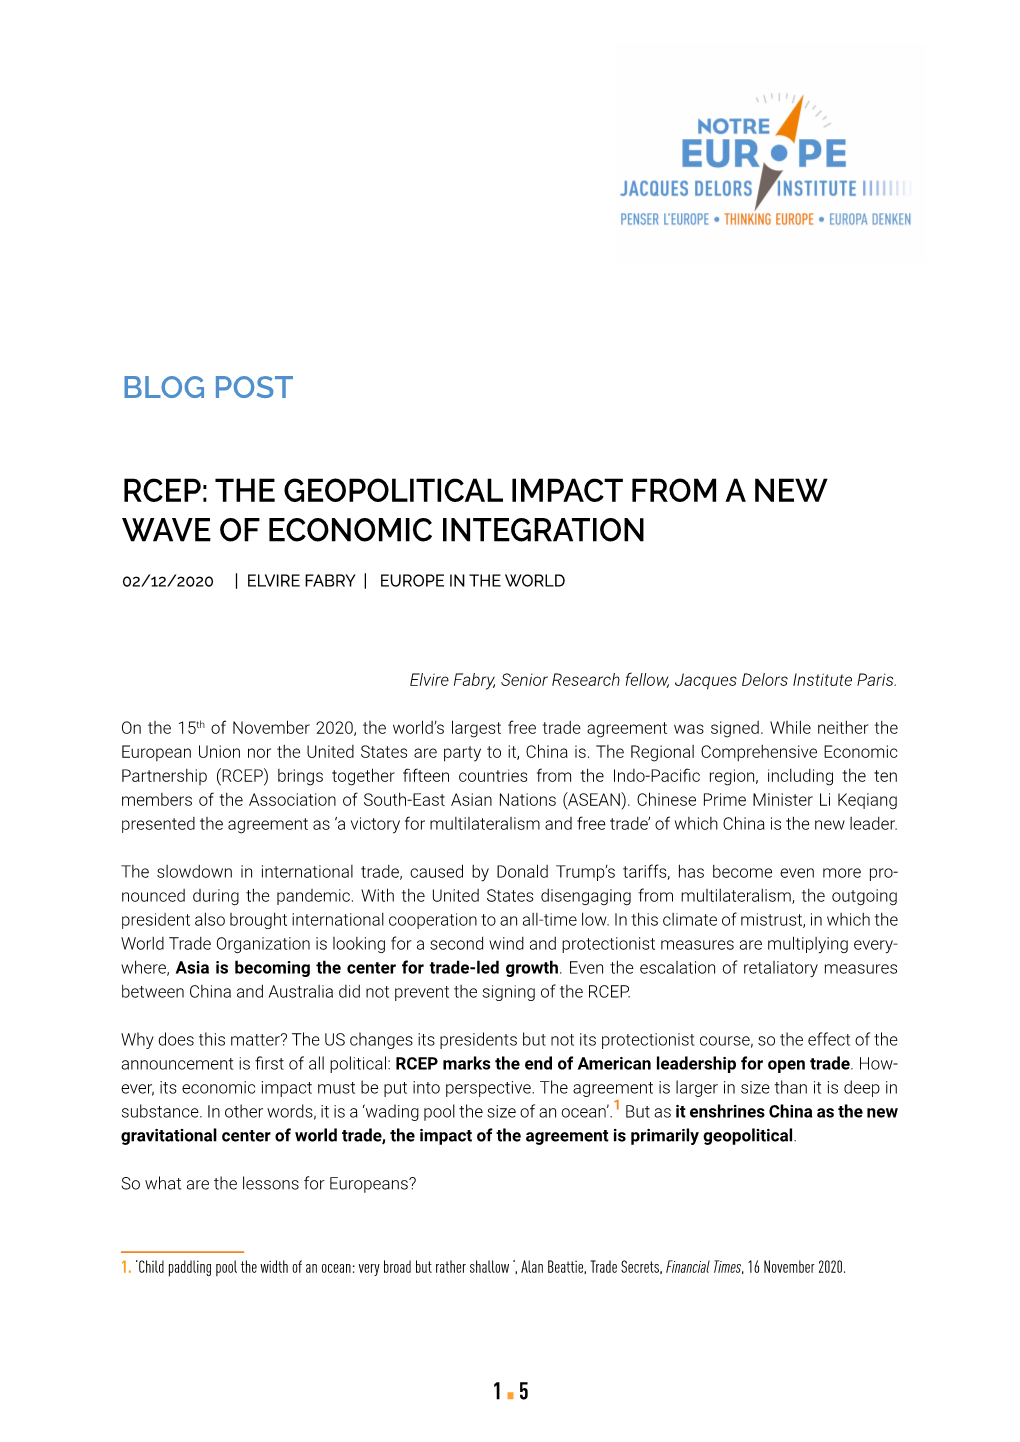 Rcep: the Geopolitical Impact from a New Wave of Economic Integration